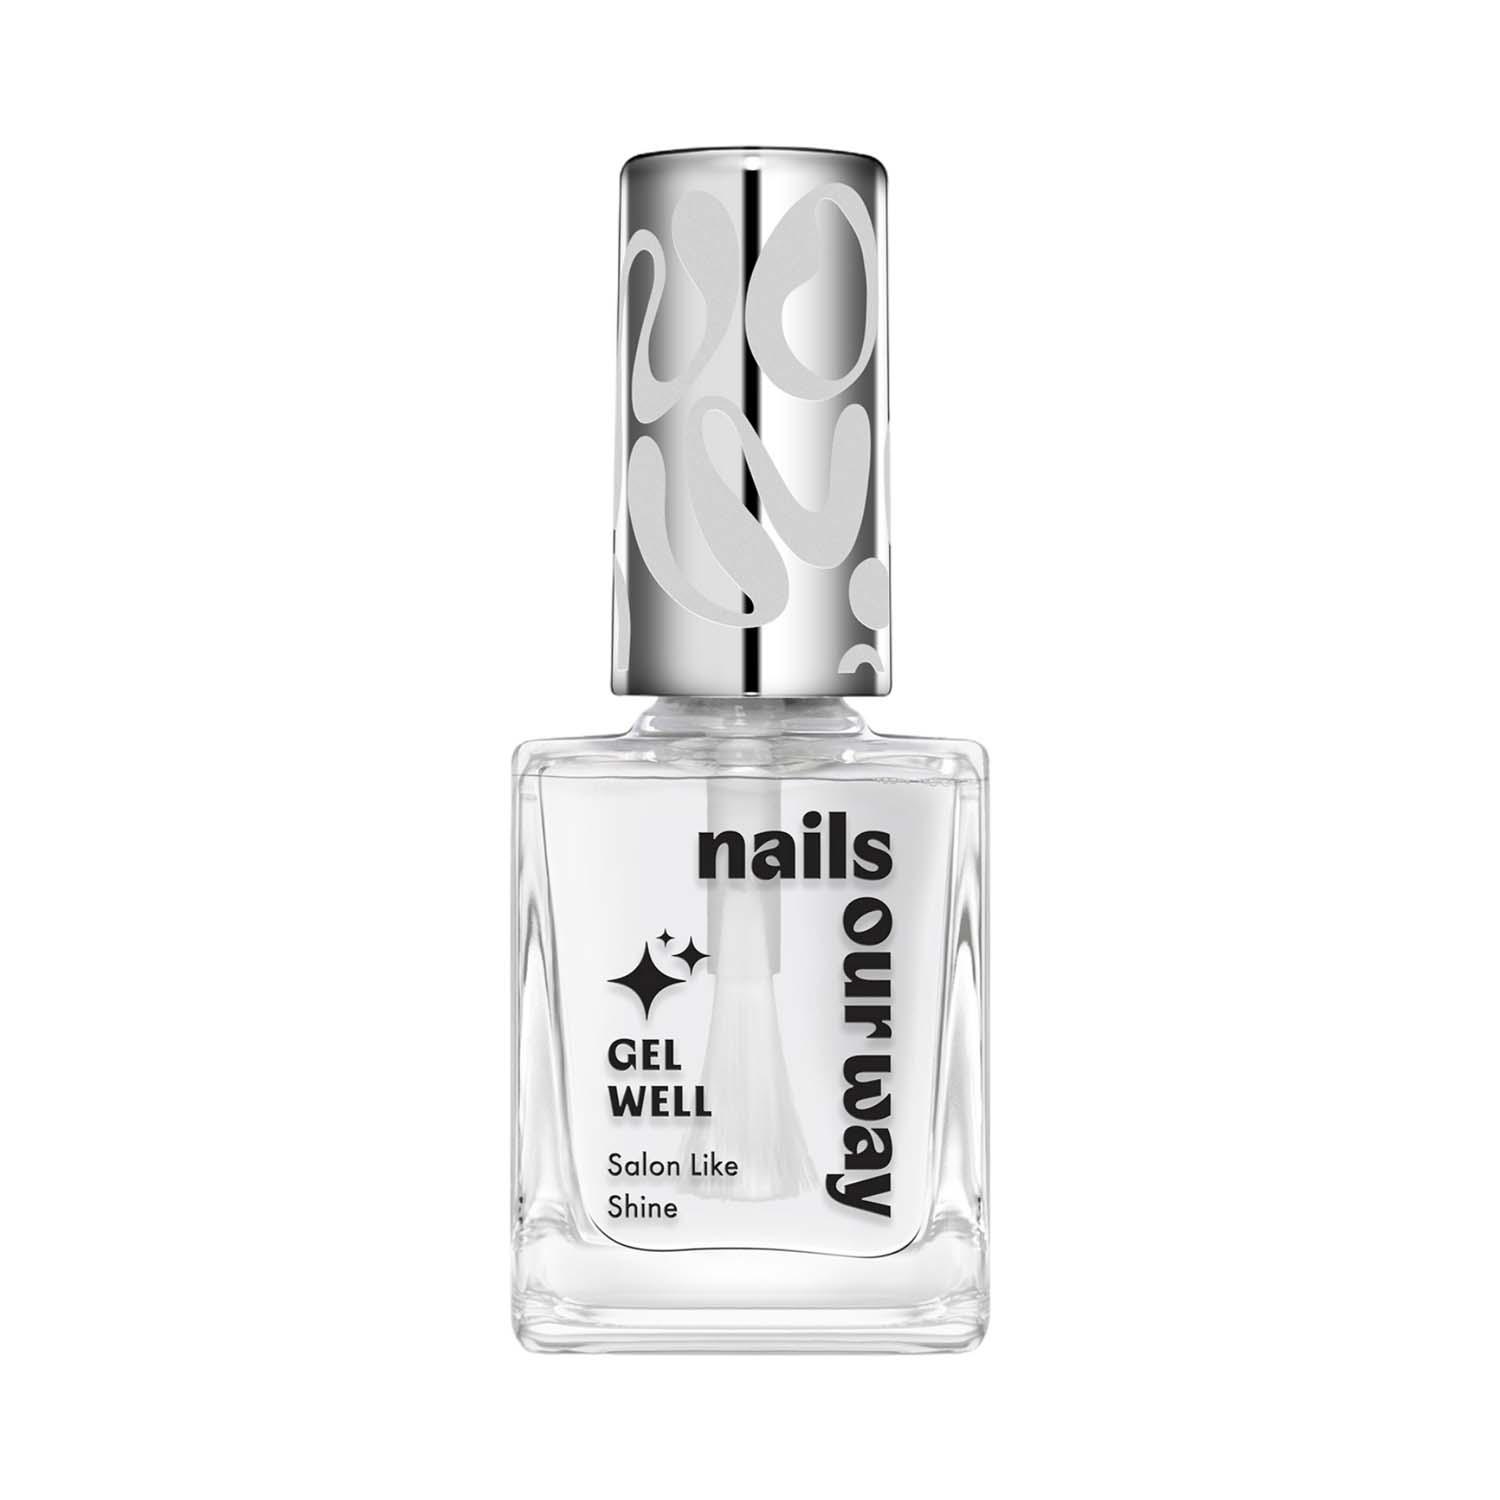 Nails Our Way | Nails Our Way Gel Well Nail Enamel - 701 Posh (10 ml)